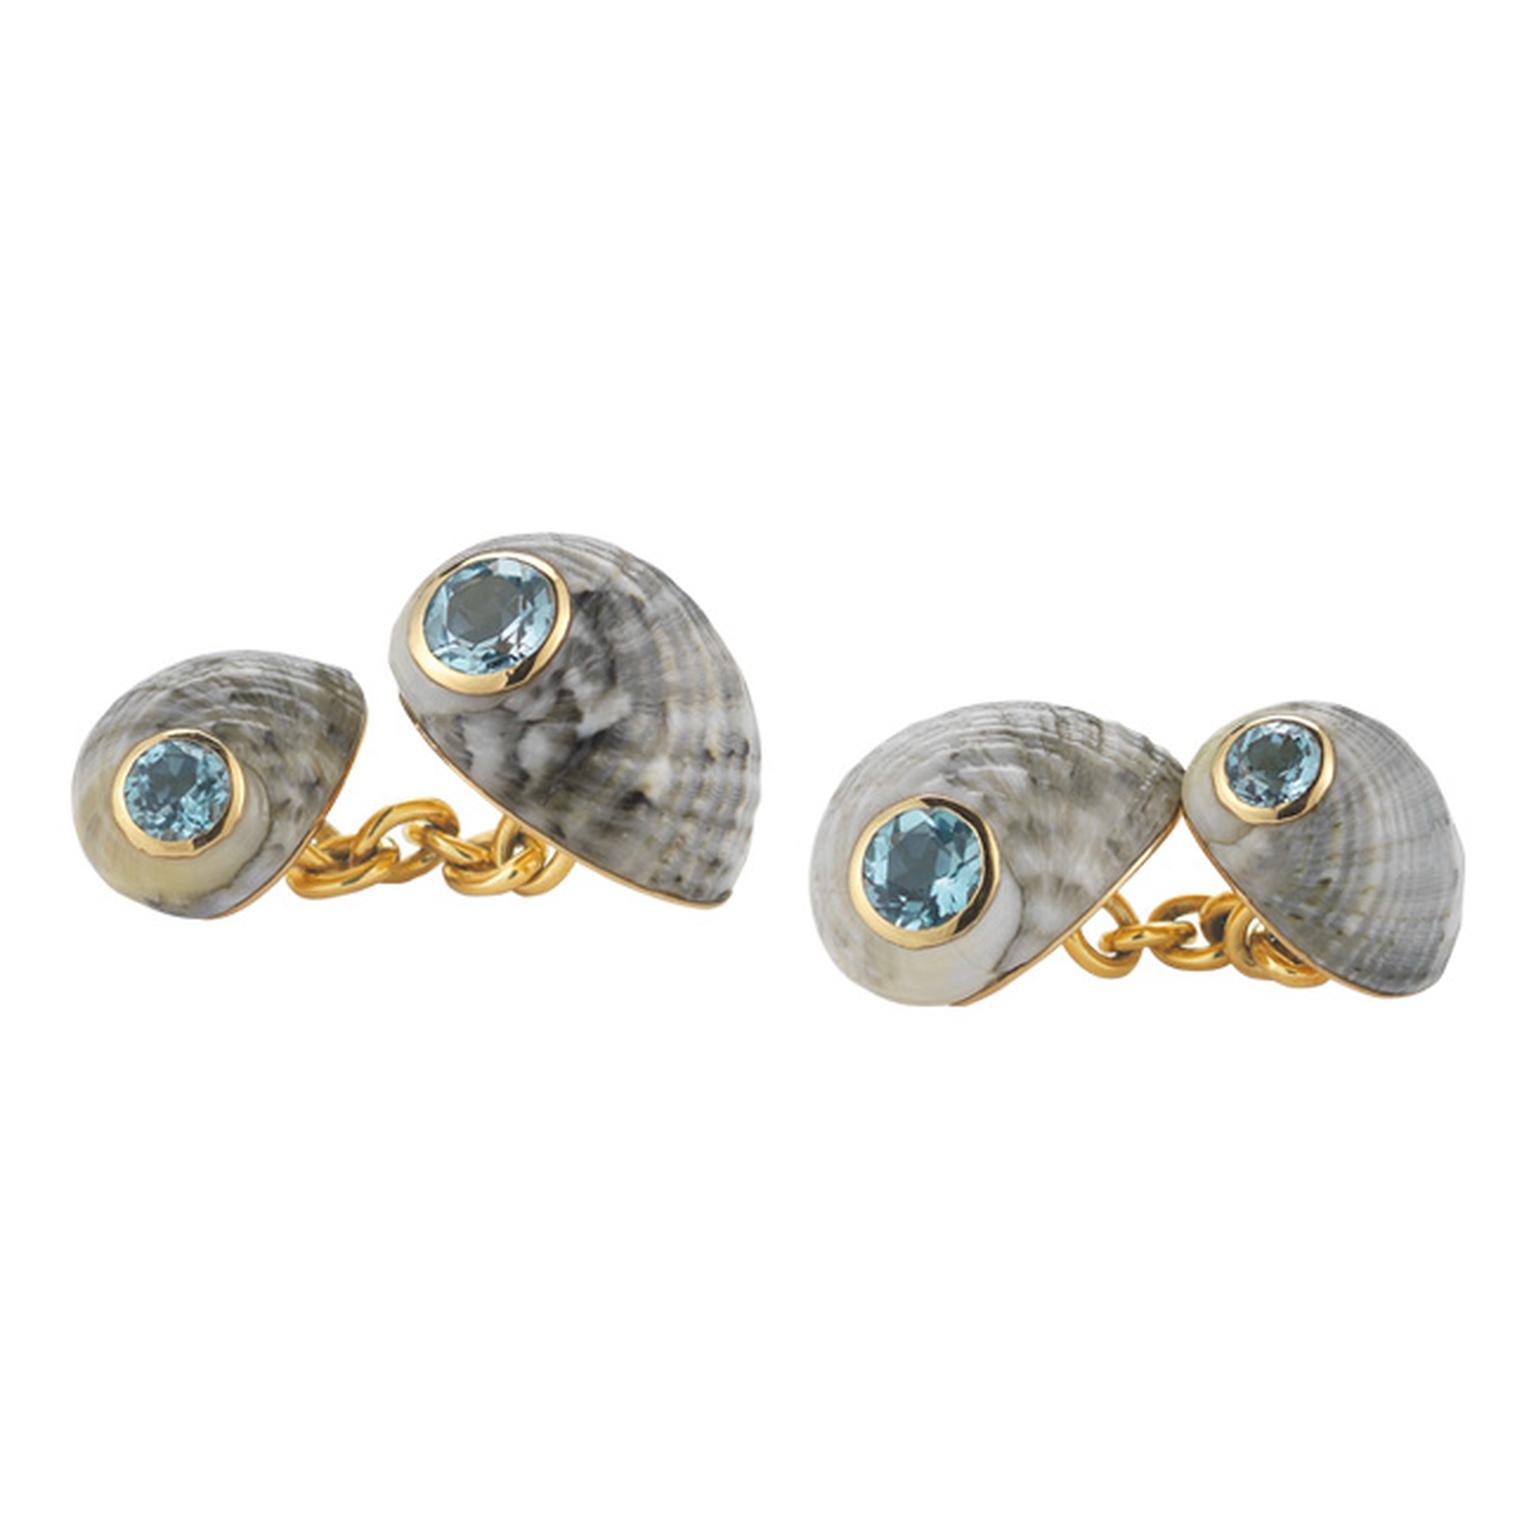 Trianon yellow gold chain-link cufflinks featuring one large and one small blue grey Nerita Chameleon shell that sit on either side of the cuff. The shells are decorated with faceted round-cut aqua blue topaz ($3,600).